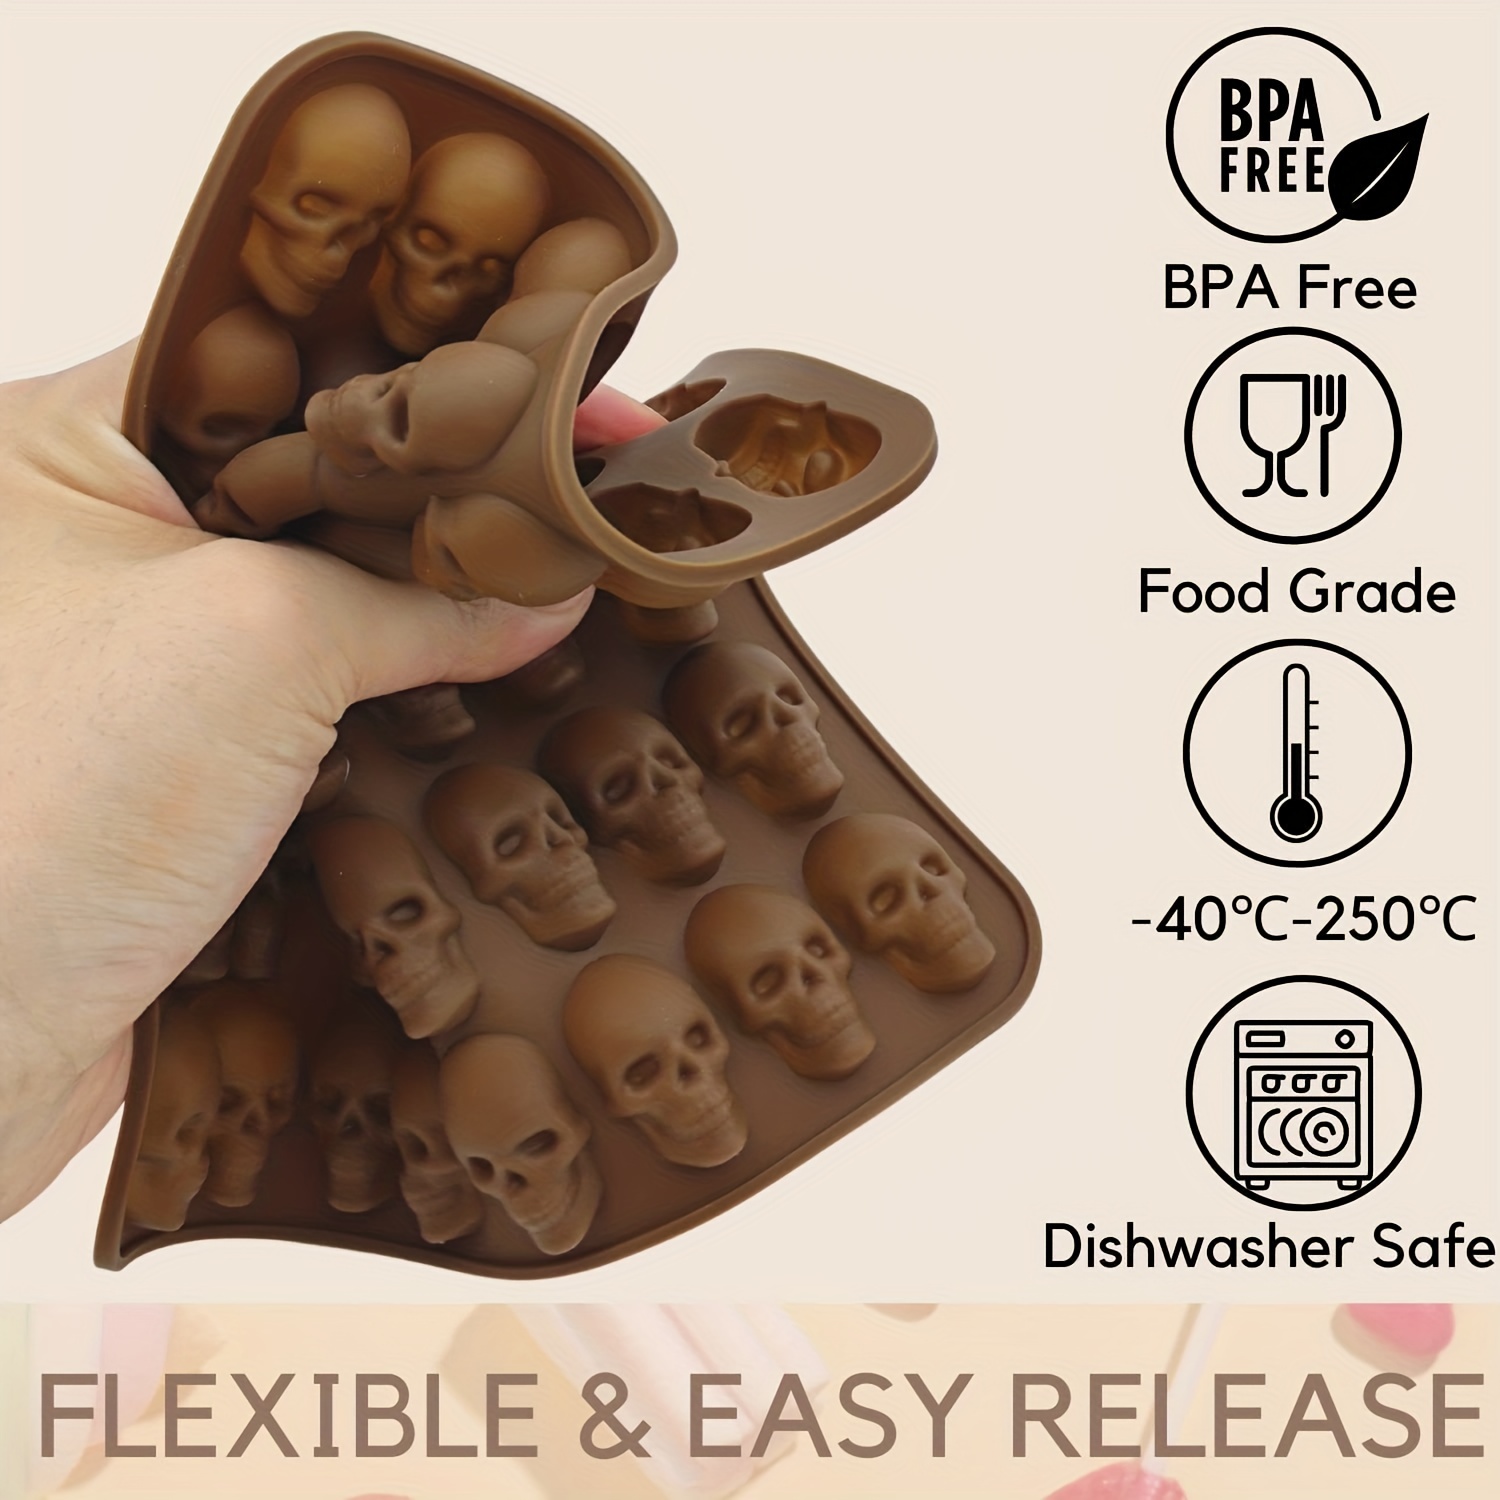 2pcs/set 40-cavity Silicone Ice Cube Tray Mold For Chocolate, Candy, Jelly,  Skull Shaped Gummy And Dropper Mold